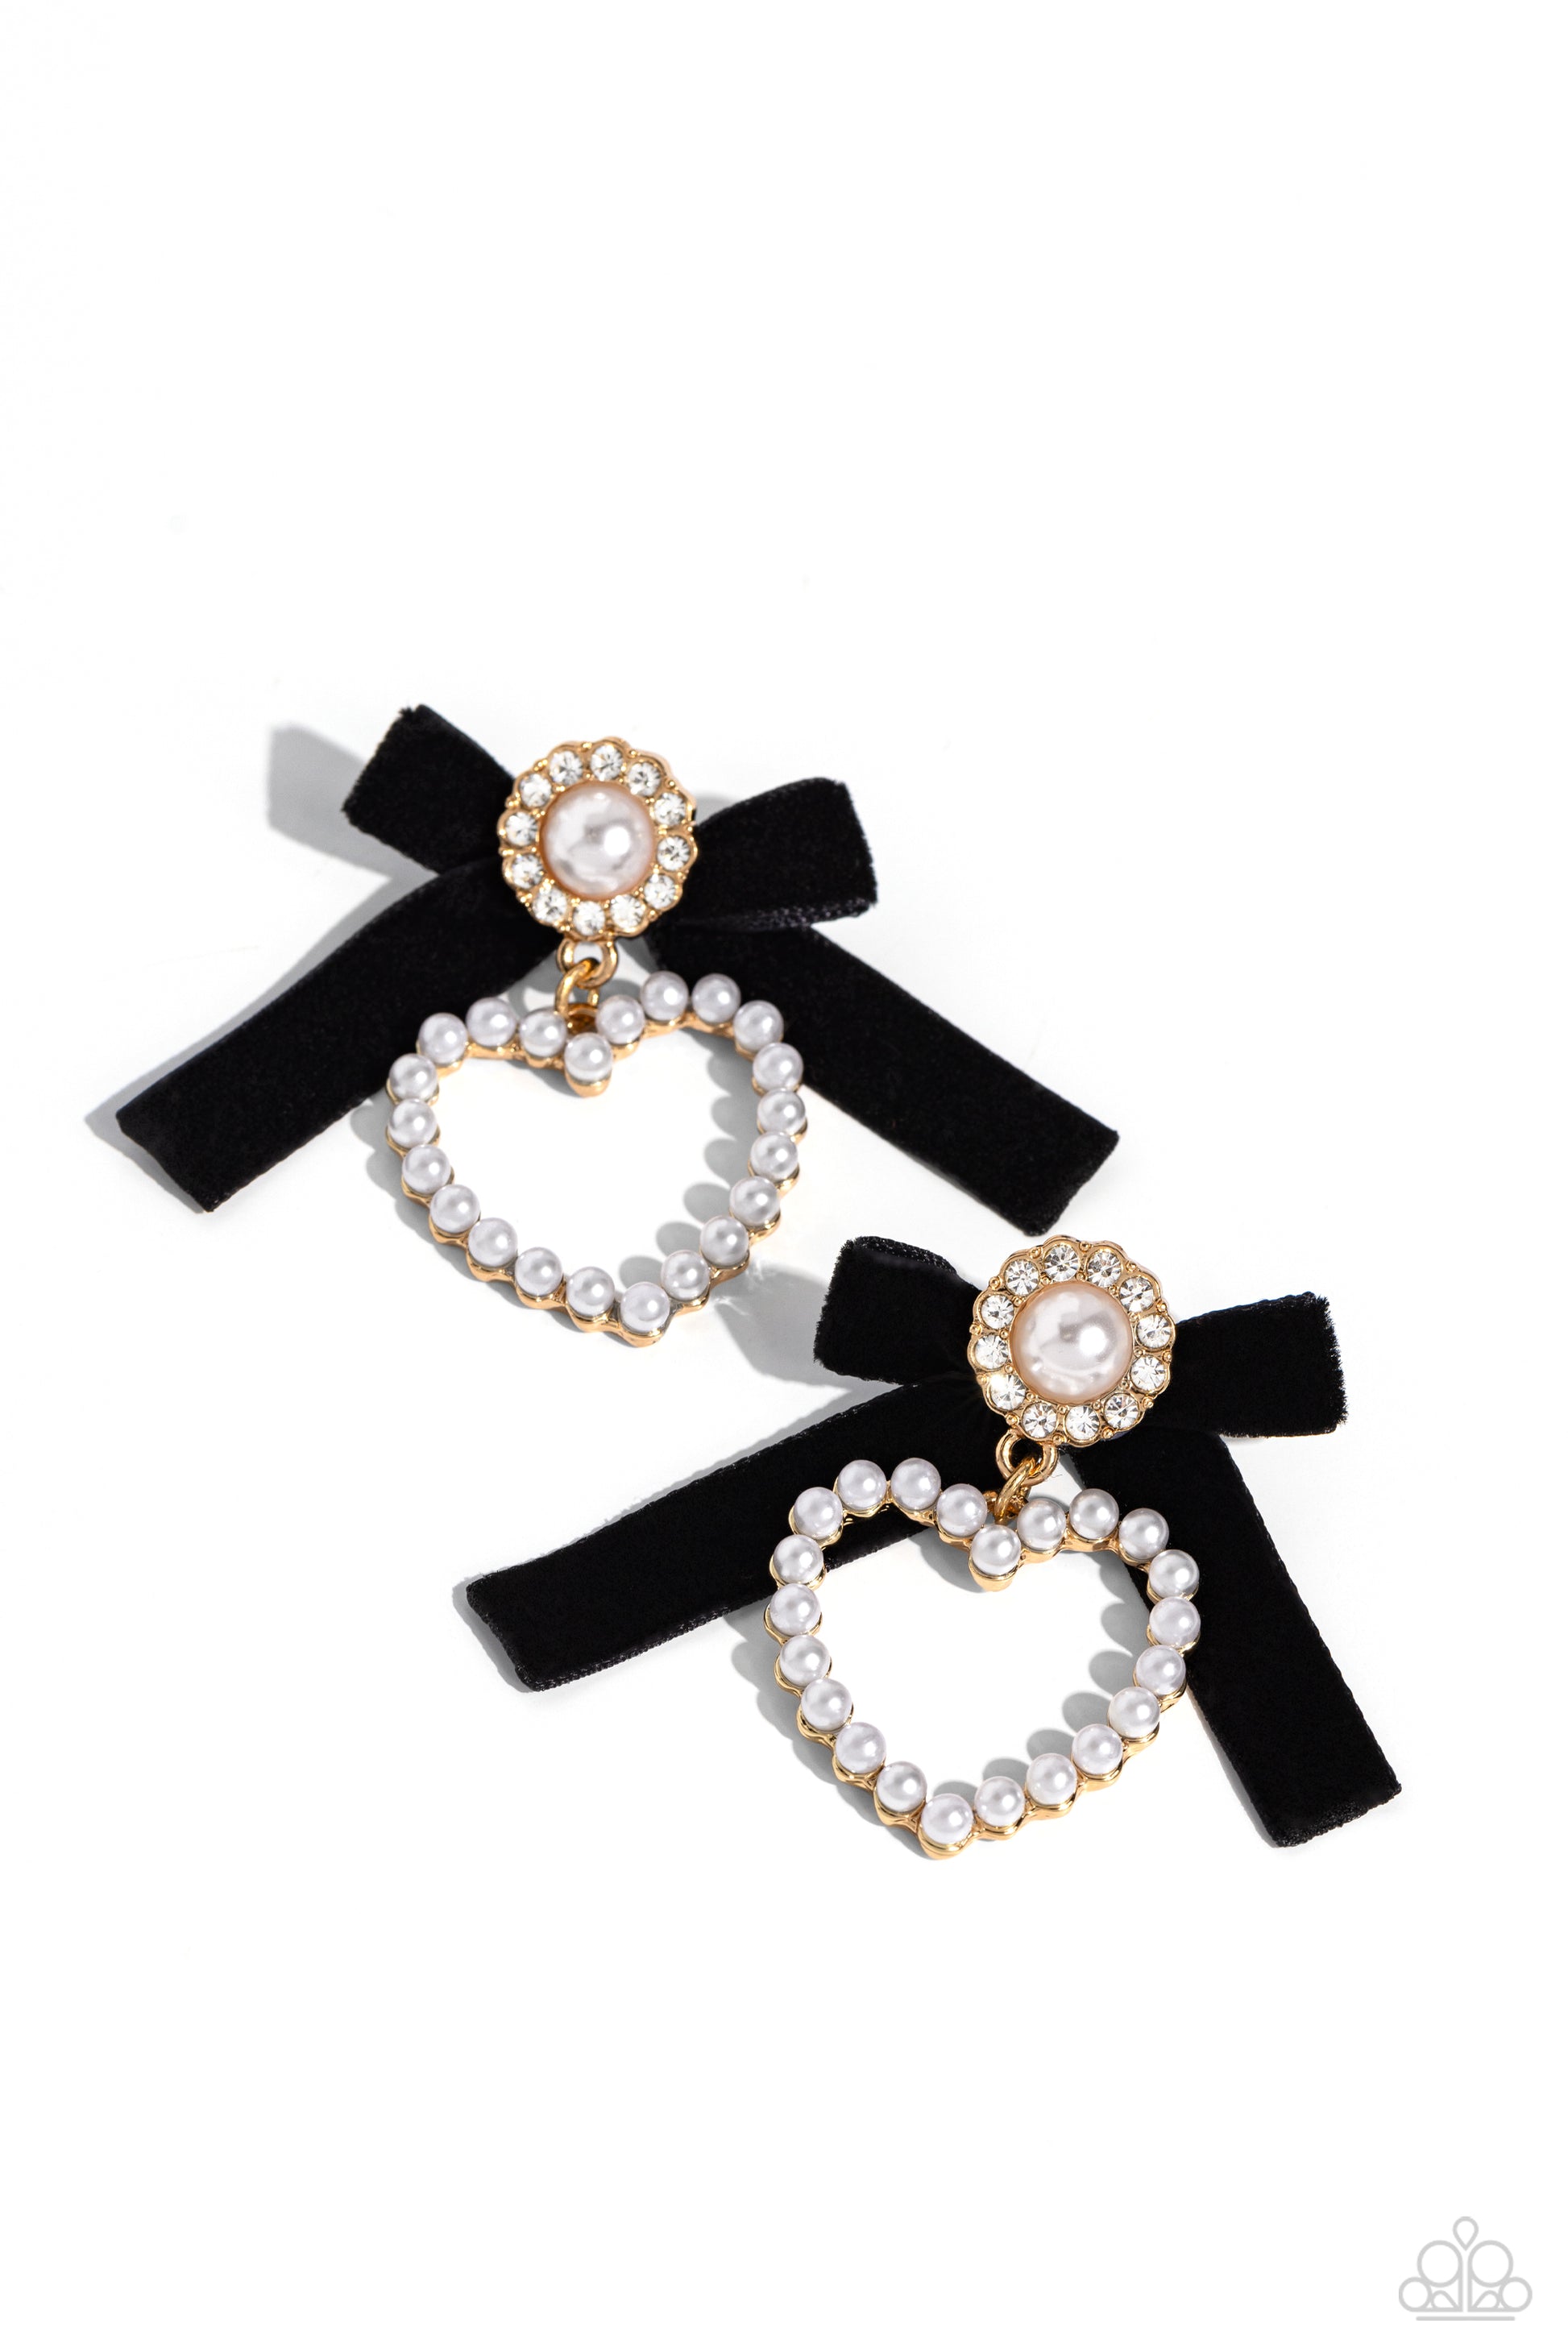 BOW and Then Gold Post Earring - Paparazzi Accessories  A solitaire white pearl, pressed in a white rhinestone-encrusted gold hoop, gleams atop a pearl-dotted heart frame resulting in a dazzling statement piece. A black velvet ribbon fans out from the pearly centerpiece further infusing the design with elegance. Earring attaches to a standard post fitting.  Sold as one pair of post earrings.  Sku:  P5PO-GDXX-248XX